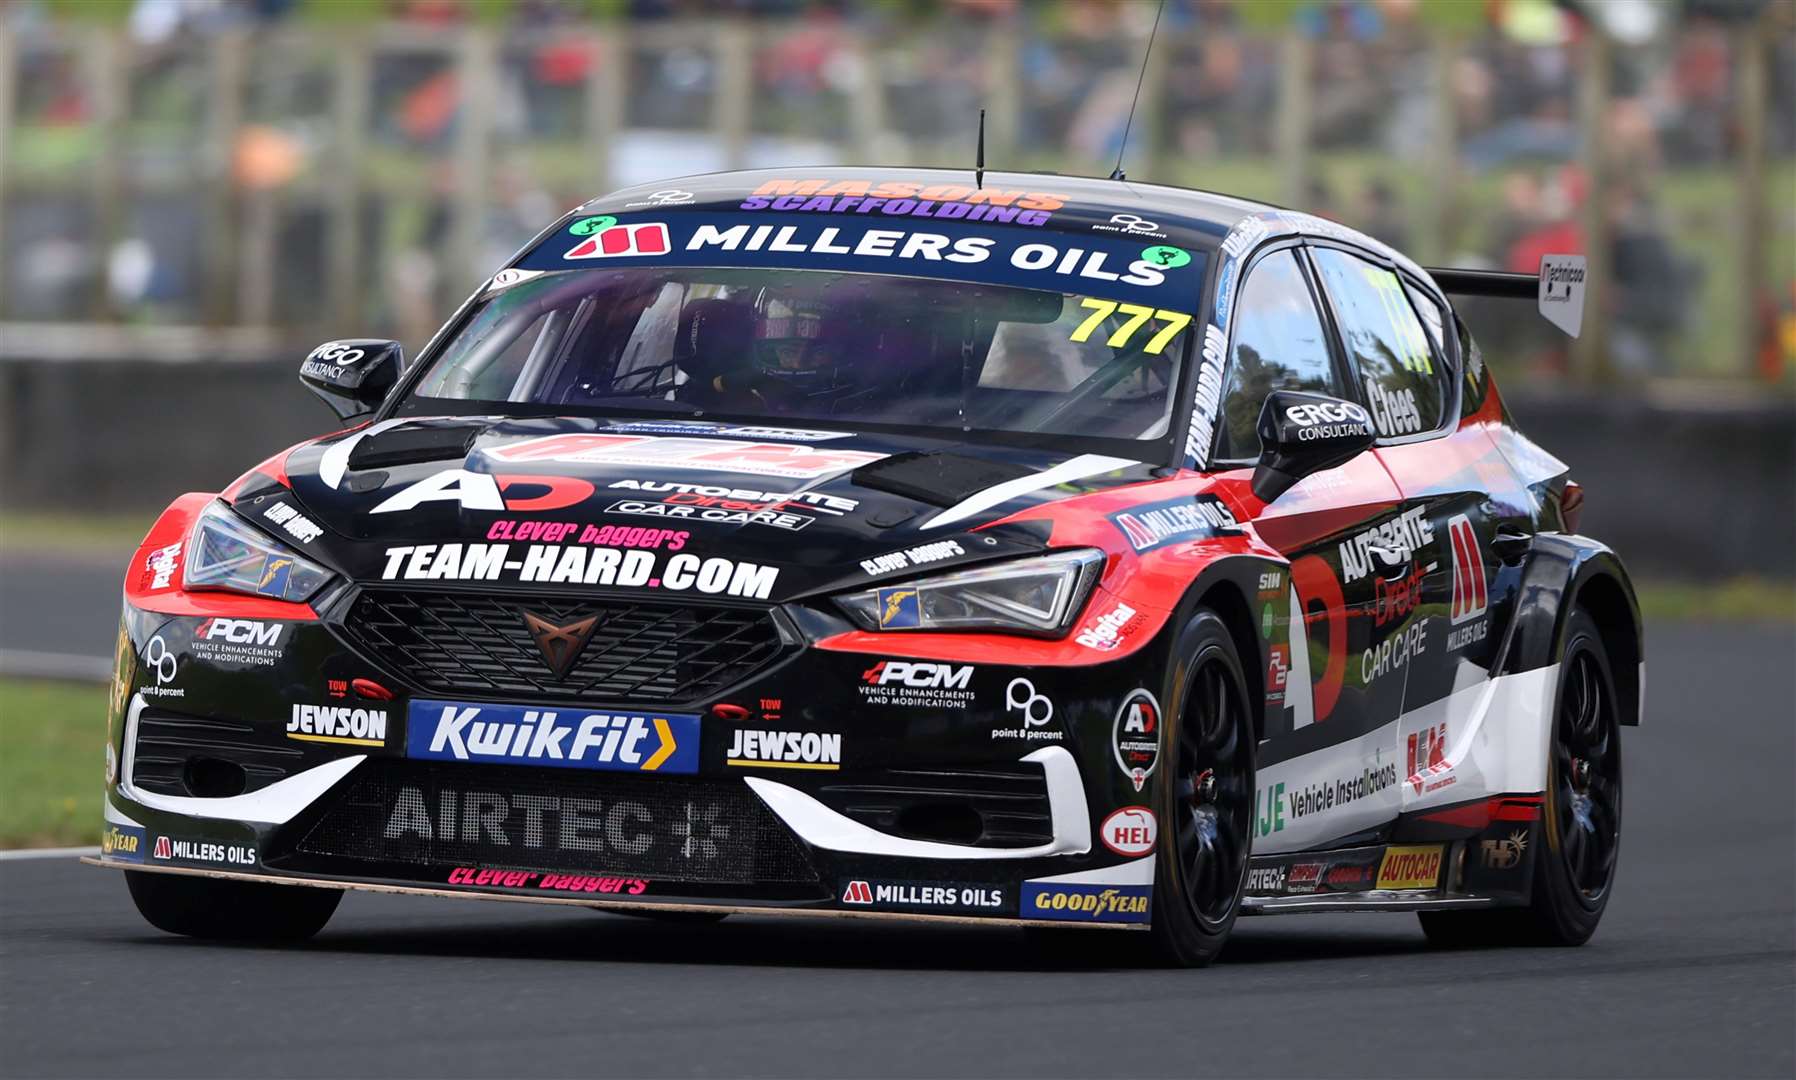 Michael Crees' best finish at Croft was 11th. Picture: BTCC